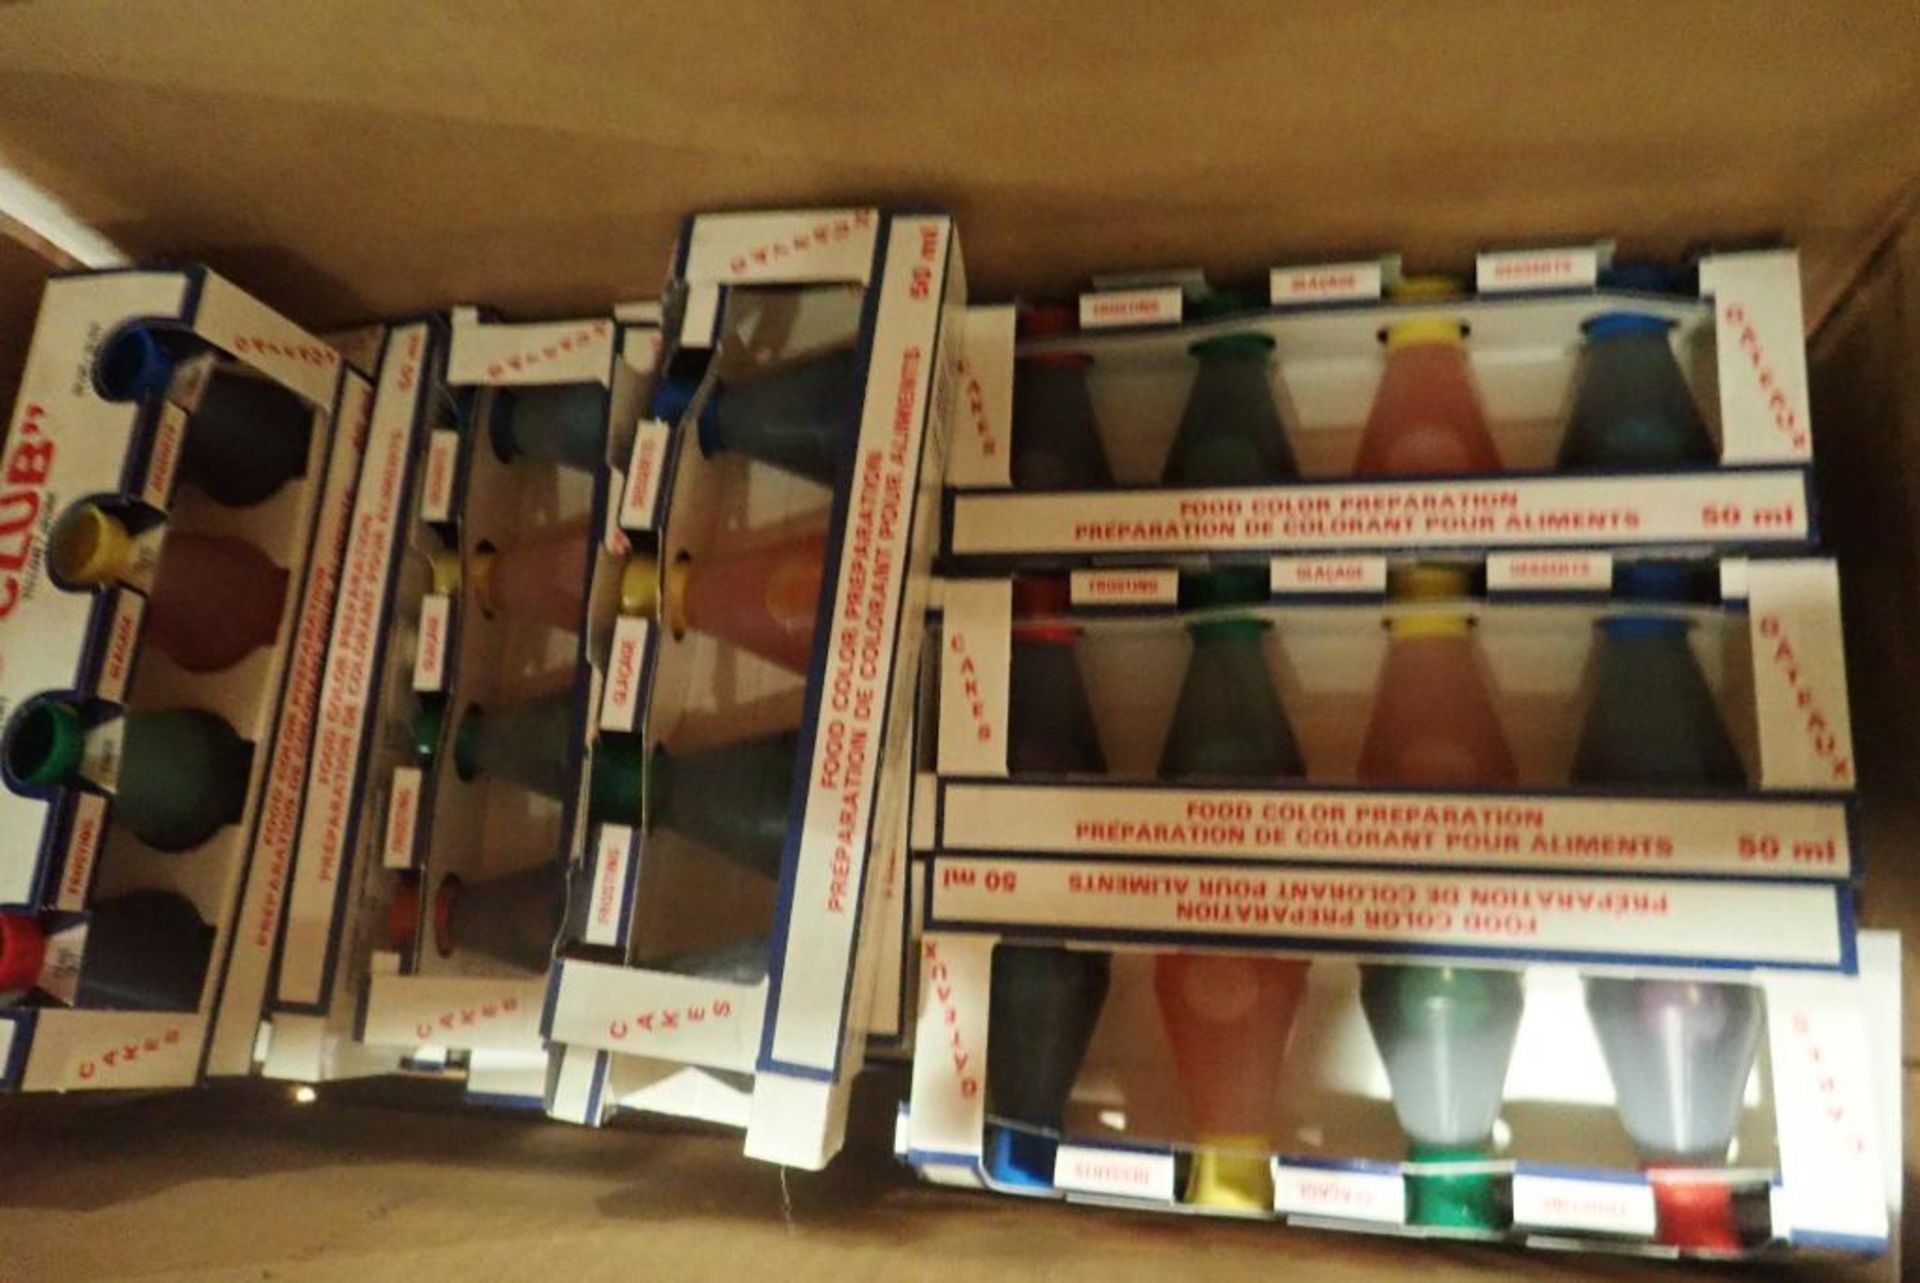 Pallet of Asst. Candles and Food Colour. - Image 2 of 4